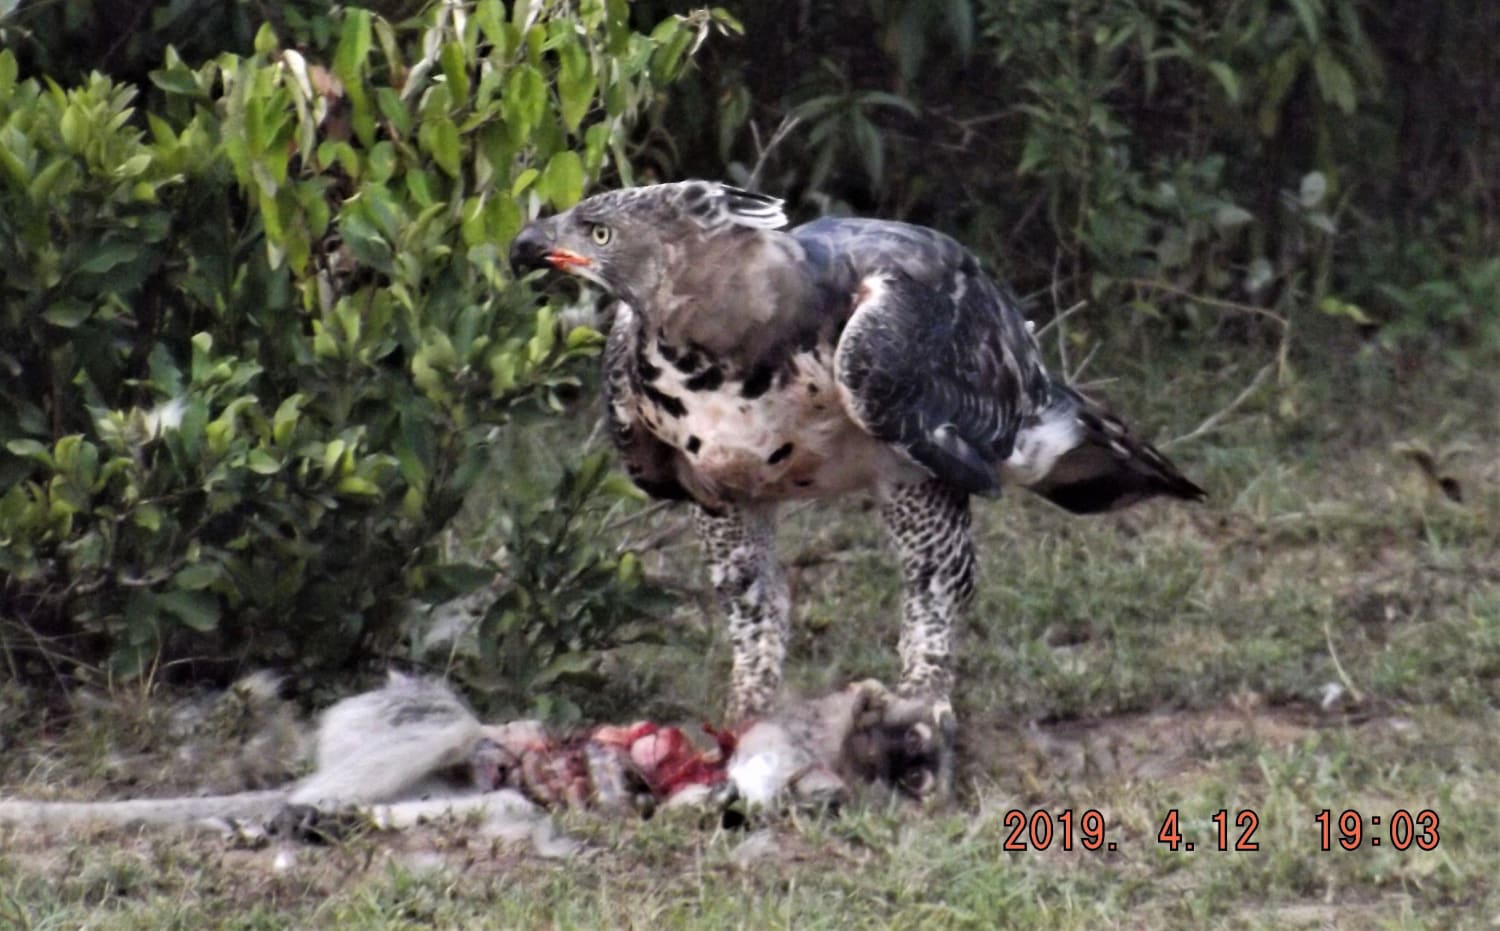 The African crowned eagle has proven to be the most regular living avian predator of primates, including monkeys up to female baboons and young apes including even children.